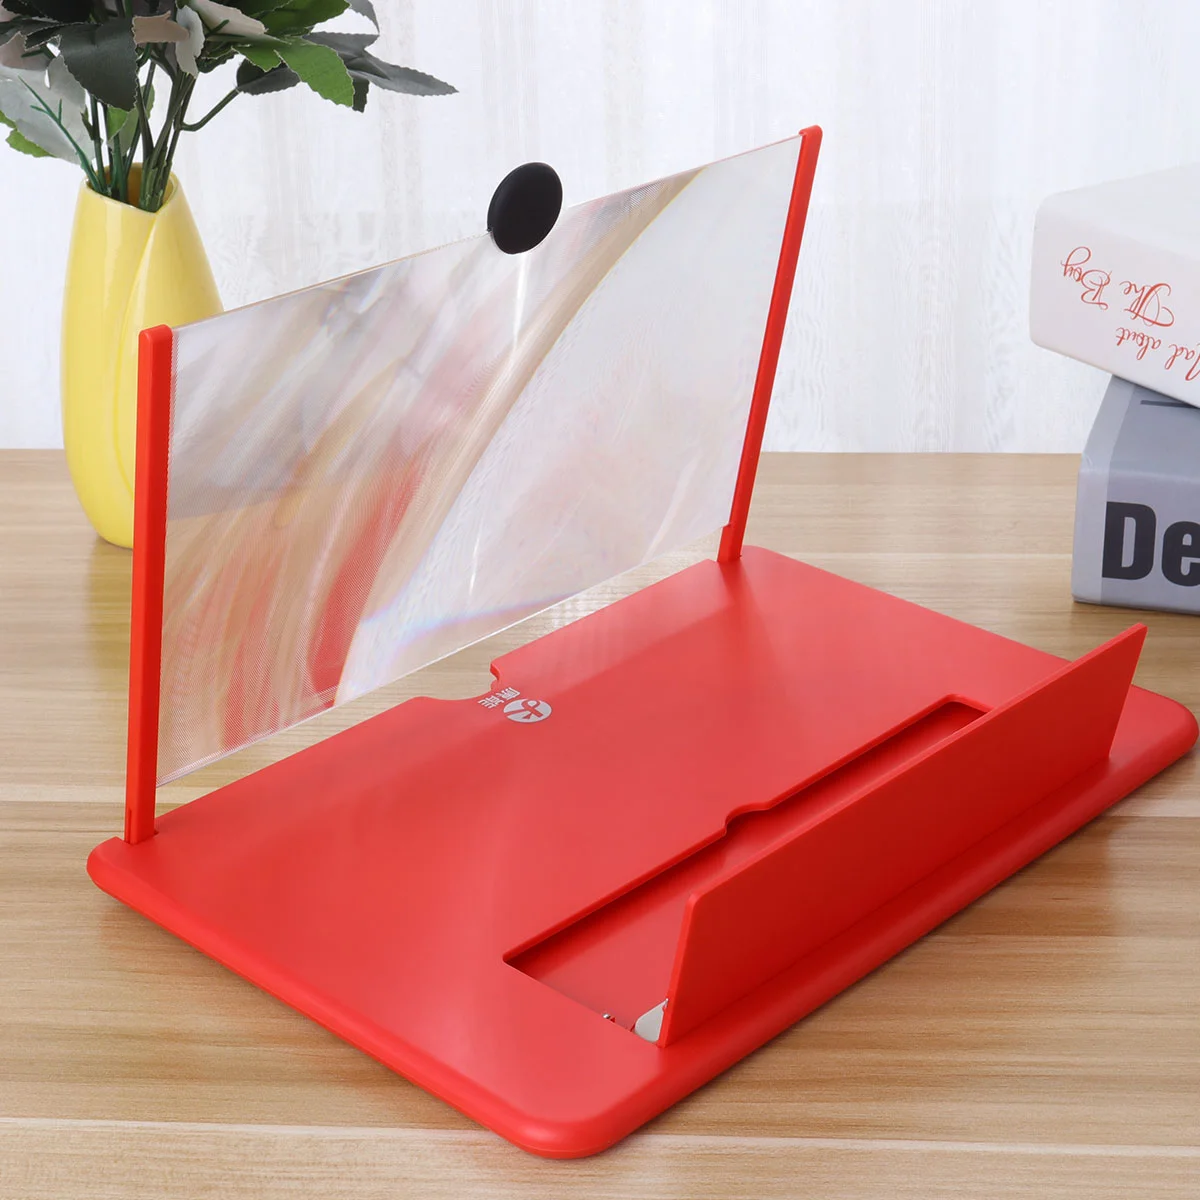 

Creative 3D Movies Screen Amplifier Radiation-proof Videos Magnifier Phone Stand Holder (Red)